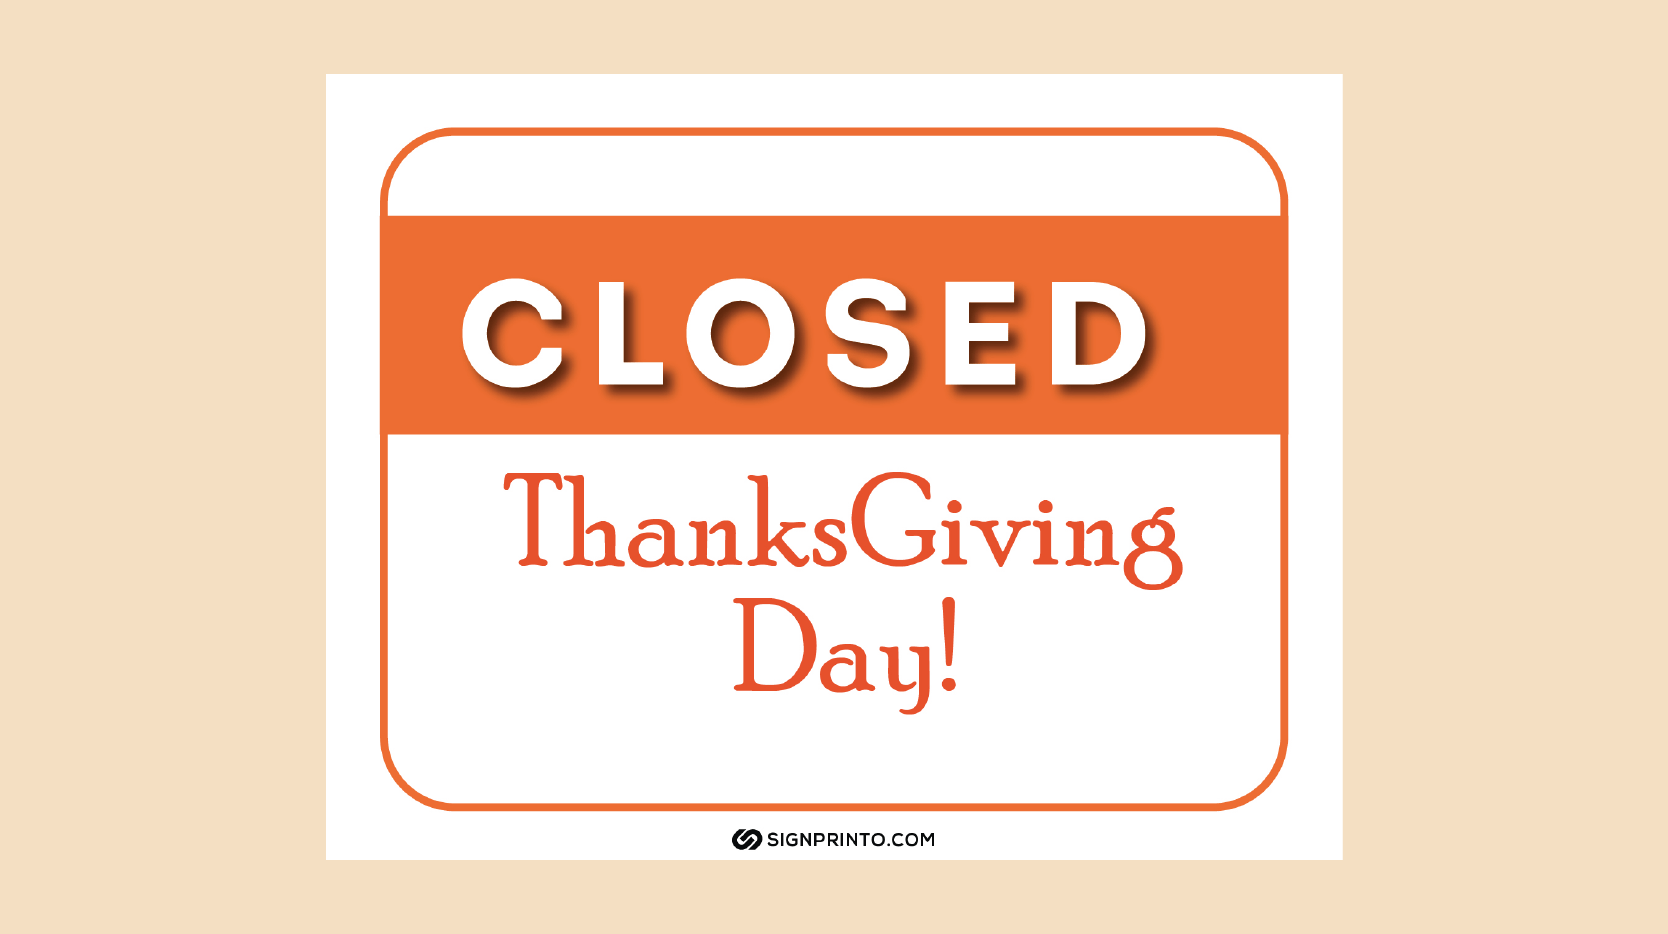 Closed for Thanksgiving sign orange color